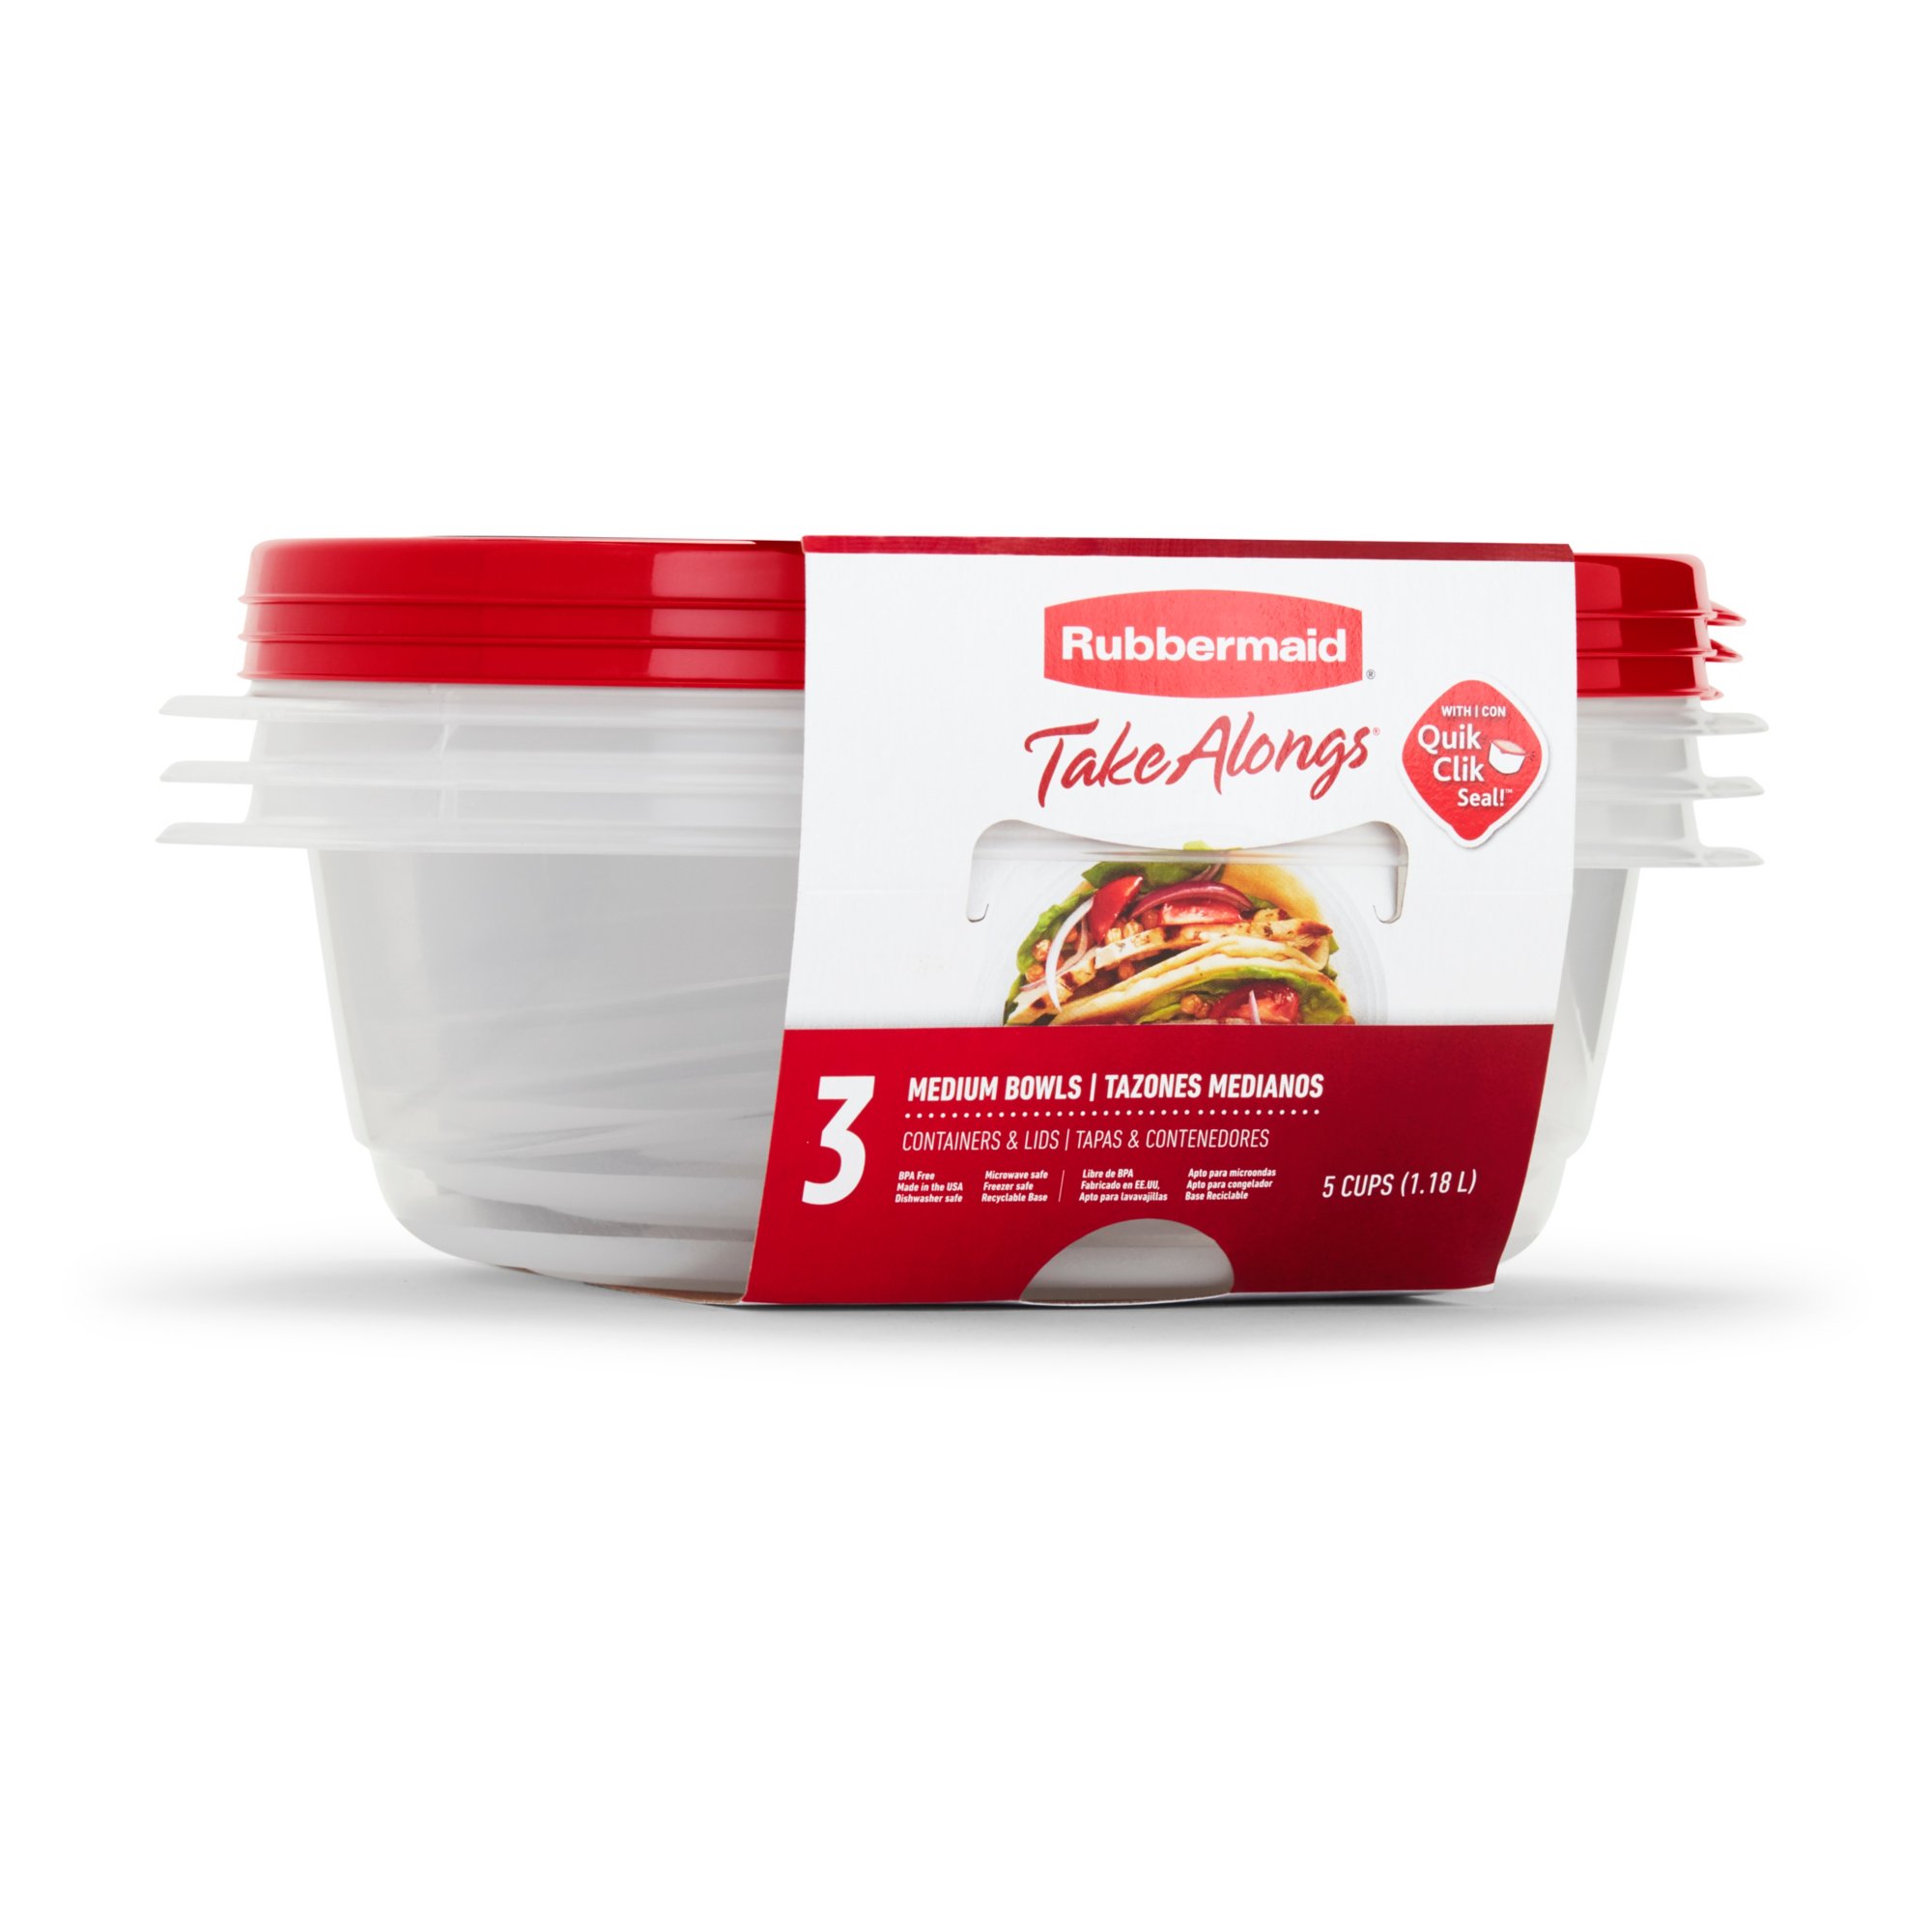 https://s7d9.scene7.com/is/image/NewellRubbermaid/2086733B32-rubbermaid-food-storage-takealongs-OS-5.0C-1.2L-TKA-RND-3PK-RUBY-in-pack-right-angle?wid=2000&hei=2000